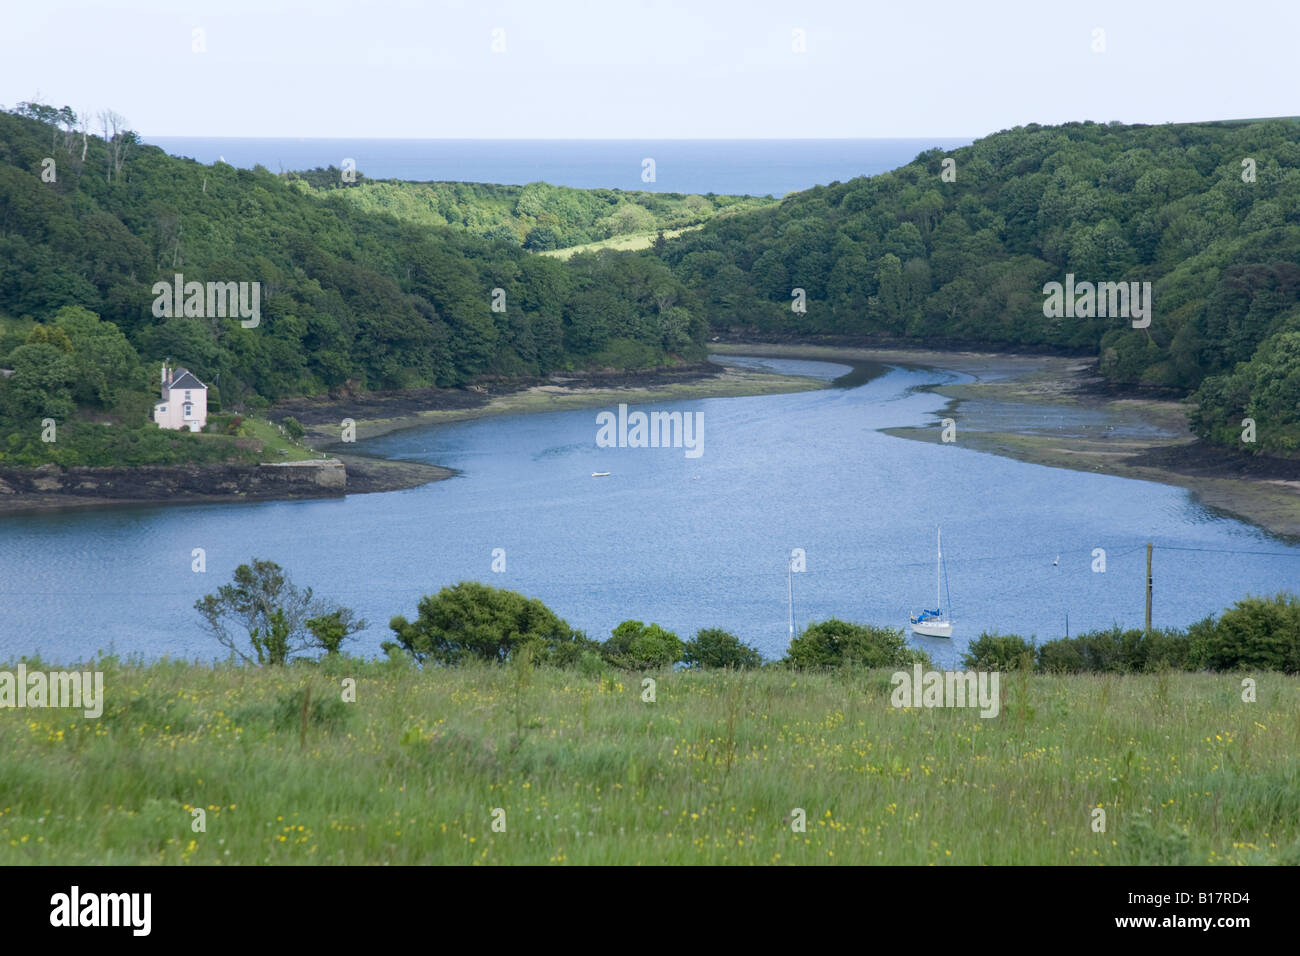 Fiume Percuil vicino a St Mawes Cornwall Inghilterra. Foto Stock